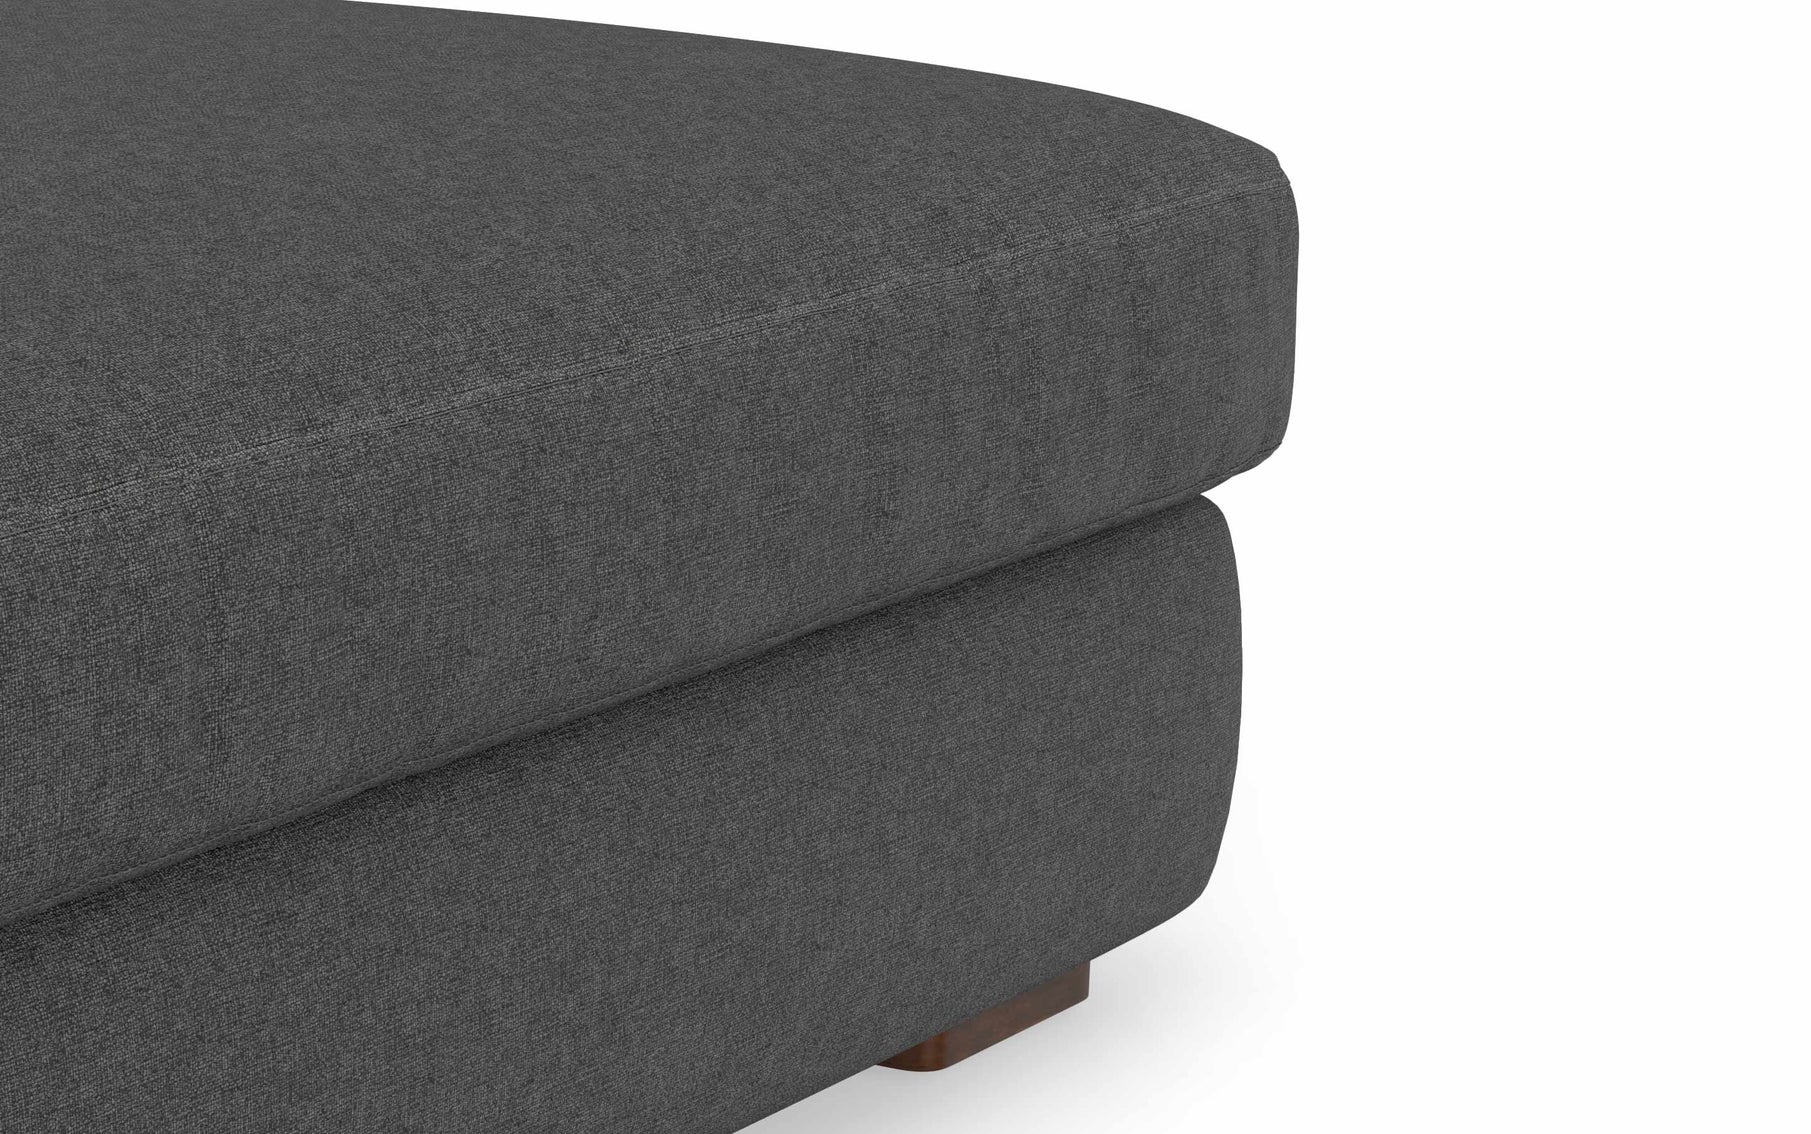 Pebble Grey Performance Fabric | Charlie Deep Seater Left Sectional